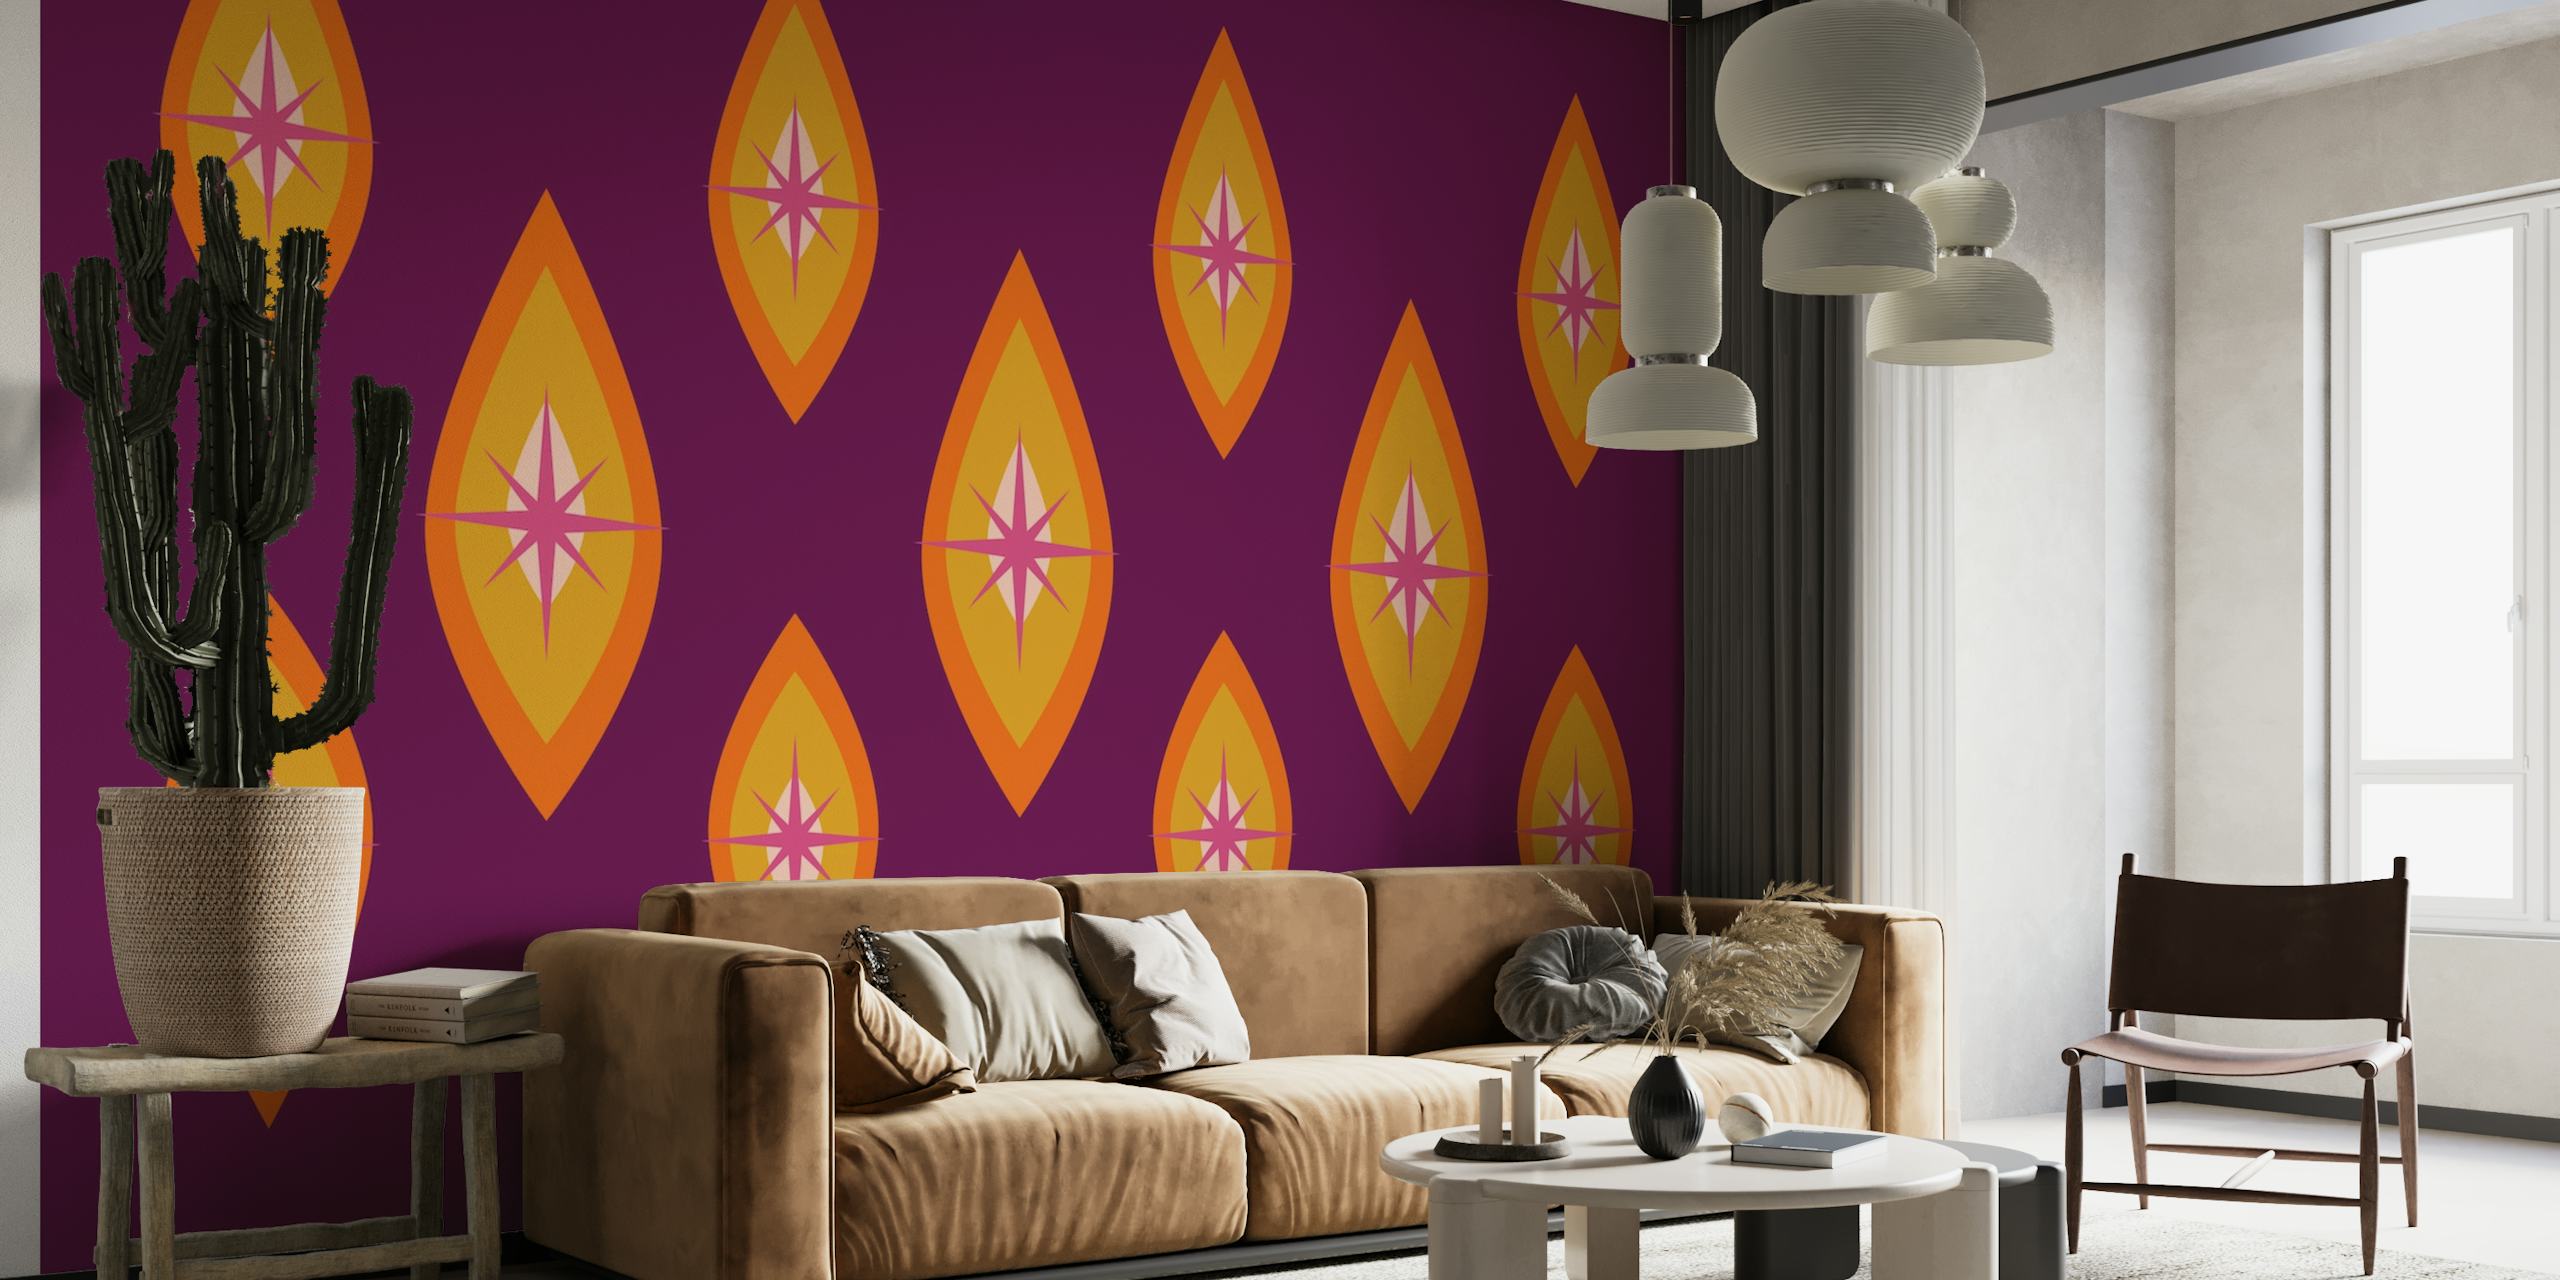 Retro-inspired 'Seventies Neon' wall mural with geometric shapes on a purple background